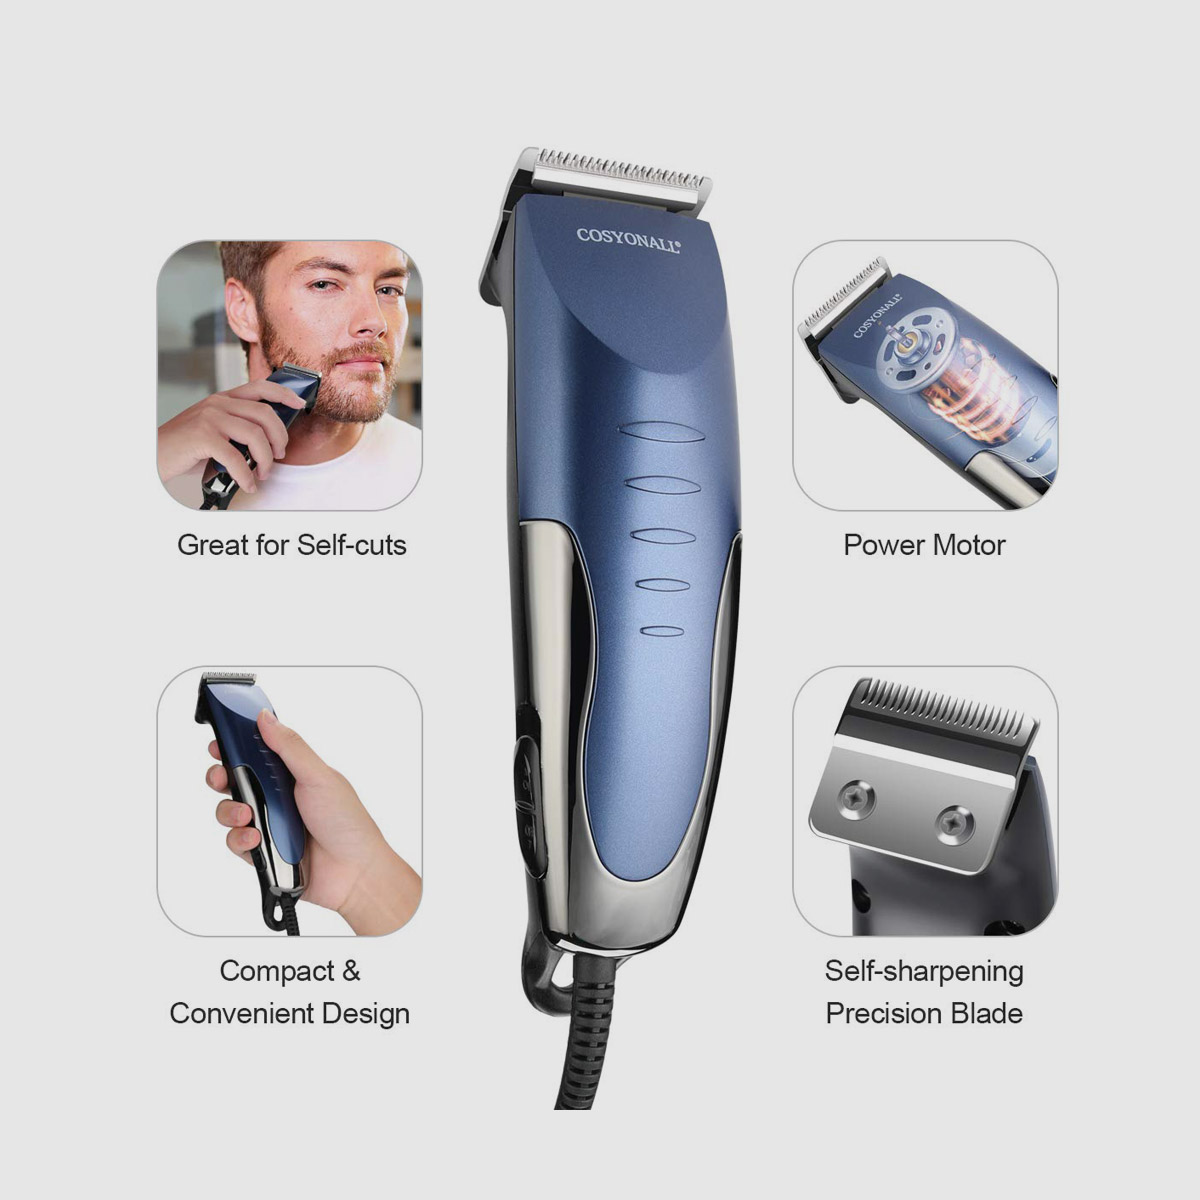 Pro Corded Hair Trimmer Cutting Kit - 1